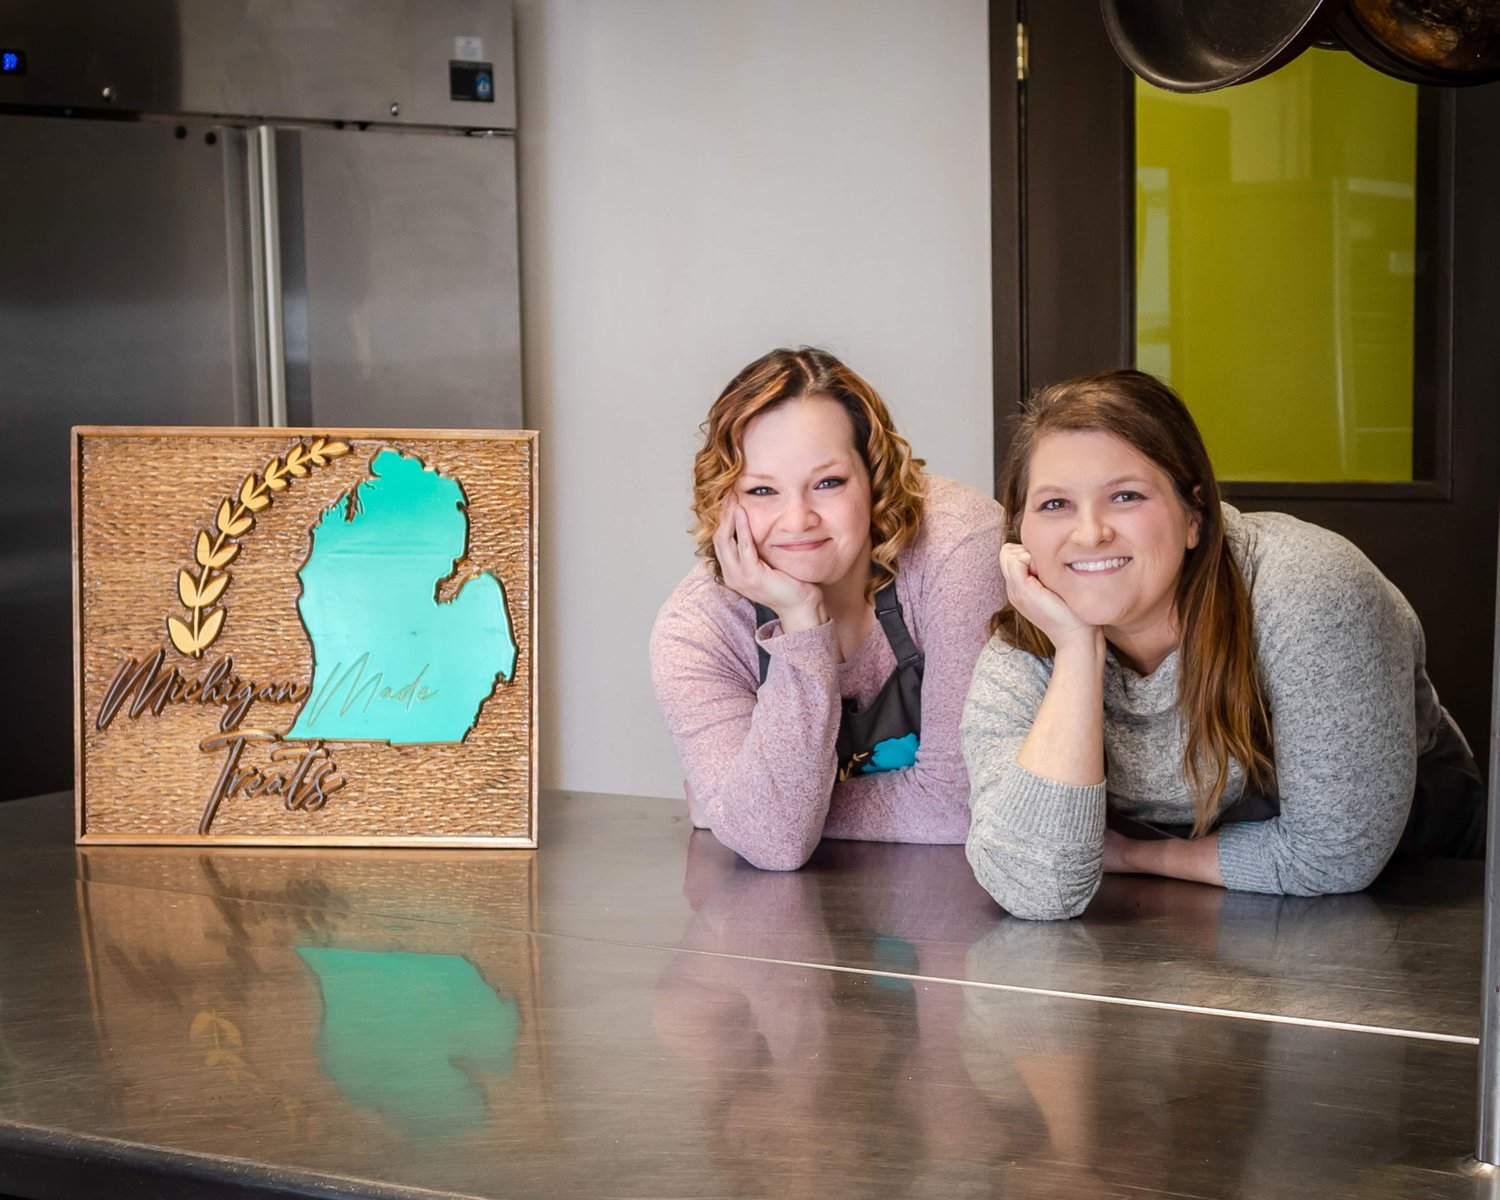 Michigan Made Treats Co-Owners Holly McDermitt and Sarah Stratton want to share their love of baked goods with everybody.